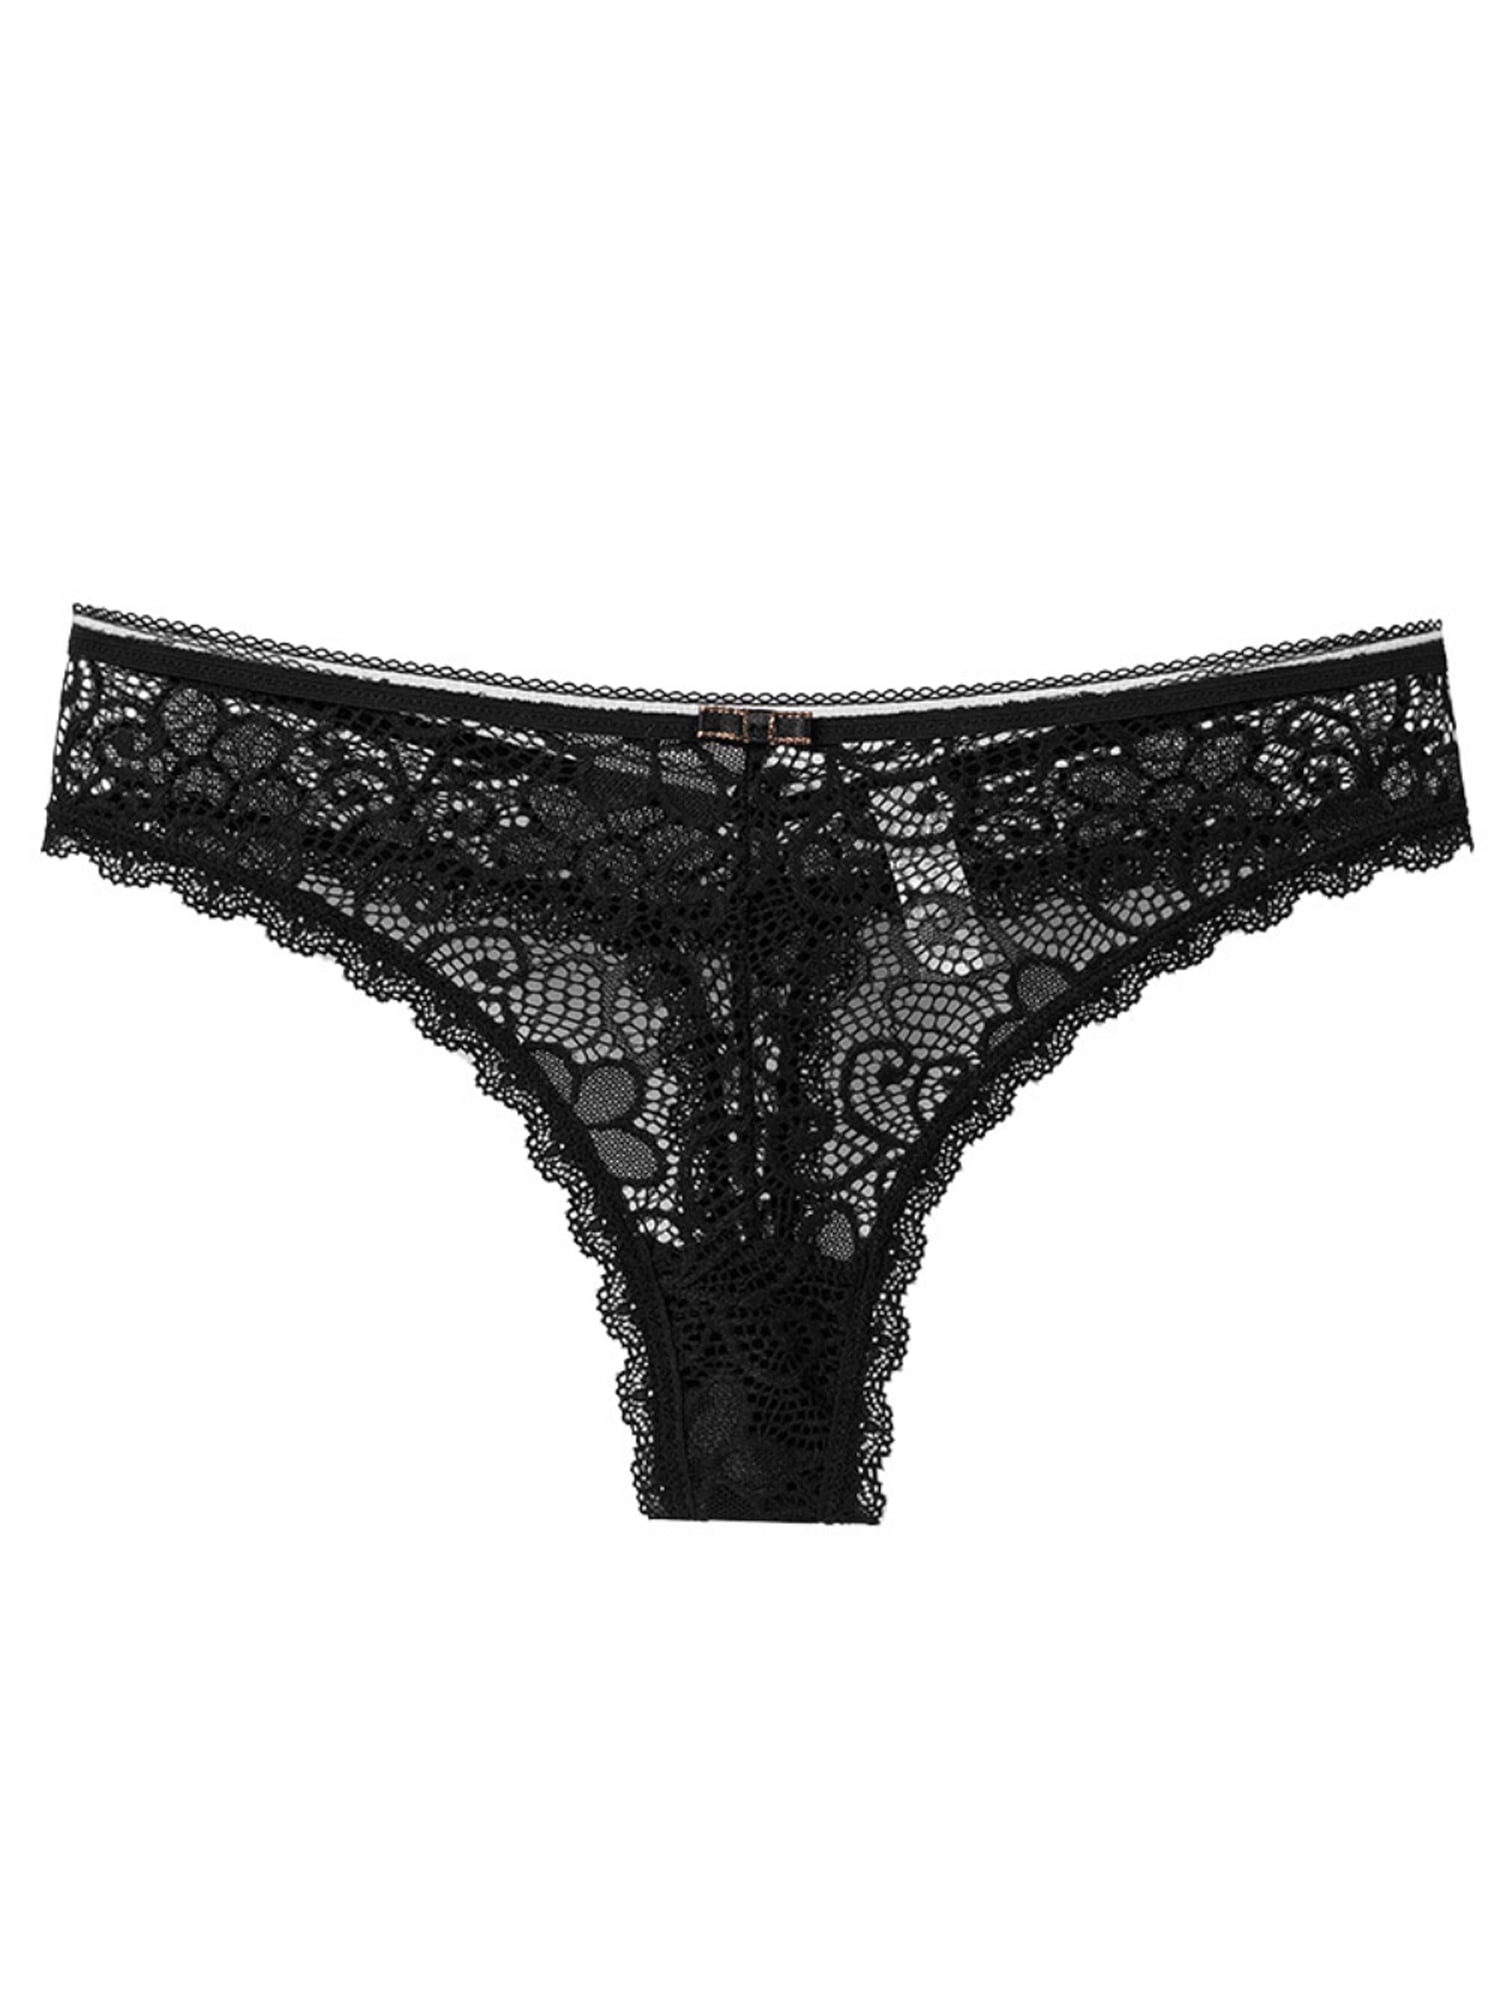 Upairc Womens Lace G Srting Thong Knickers Ladies Underwear Briefs Panties Sexy See Through Thin